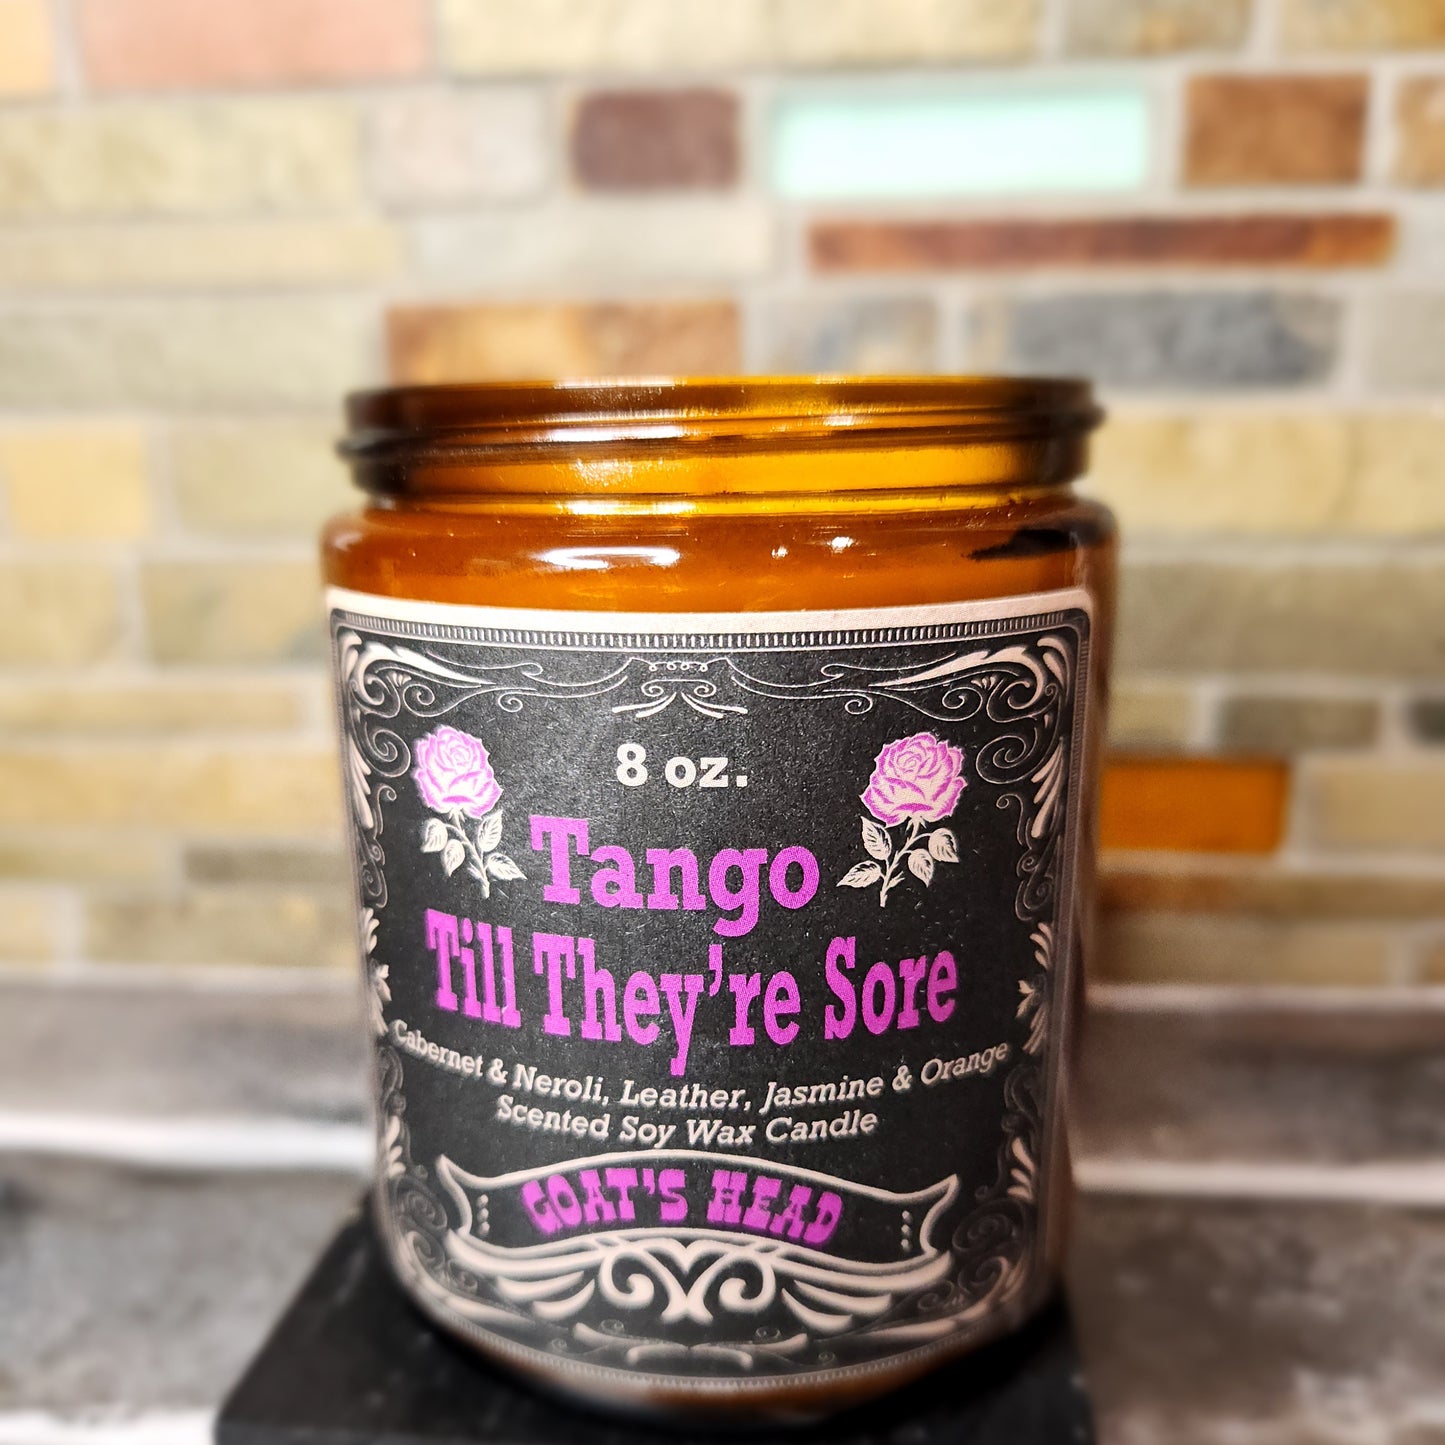 "Tango Till They're Sore" 8 oz. Scented Soy Candle